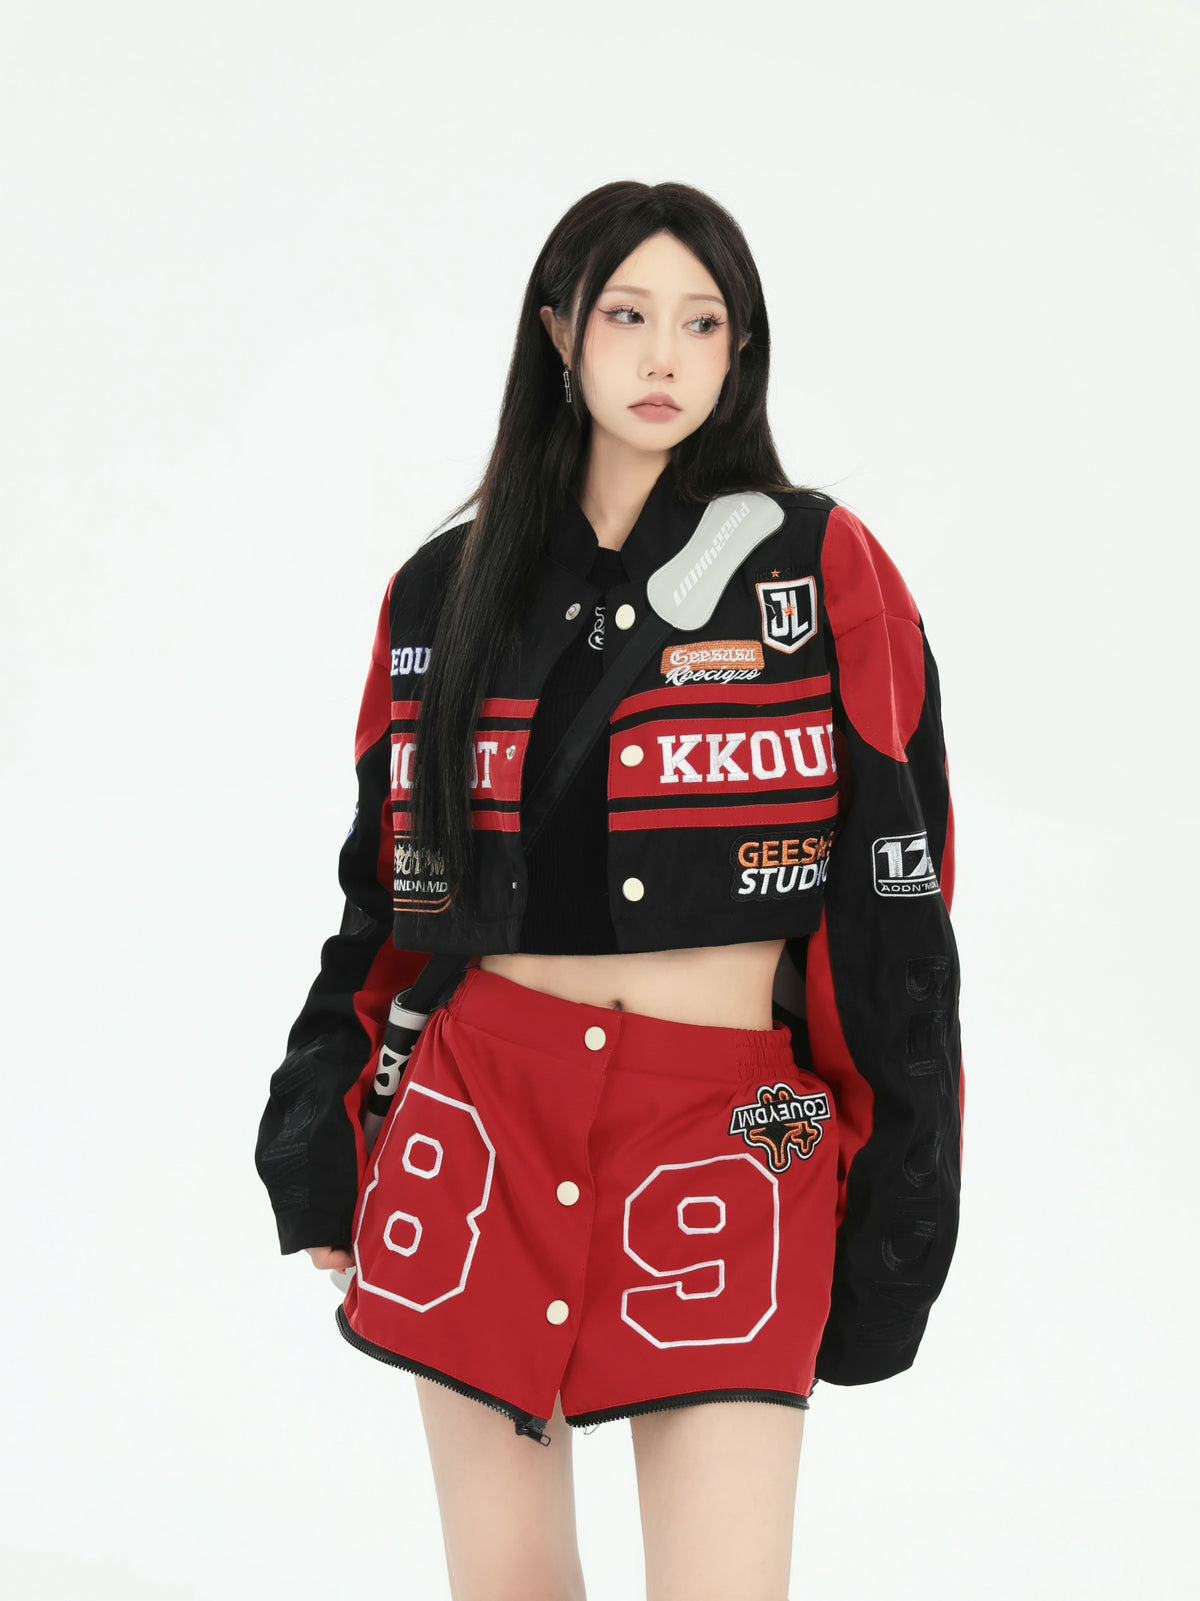 Soul Snatch | "Convertible Roadster" 2-in-1 Jacket Skirt